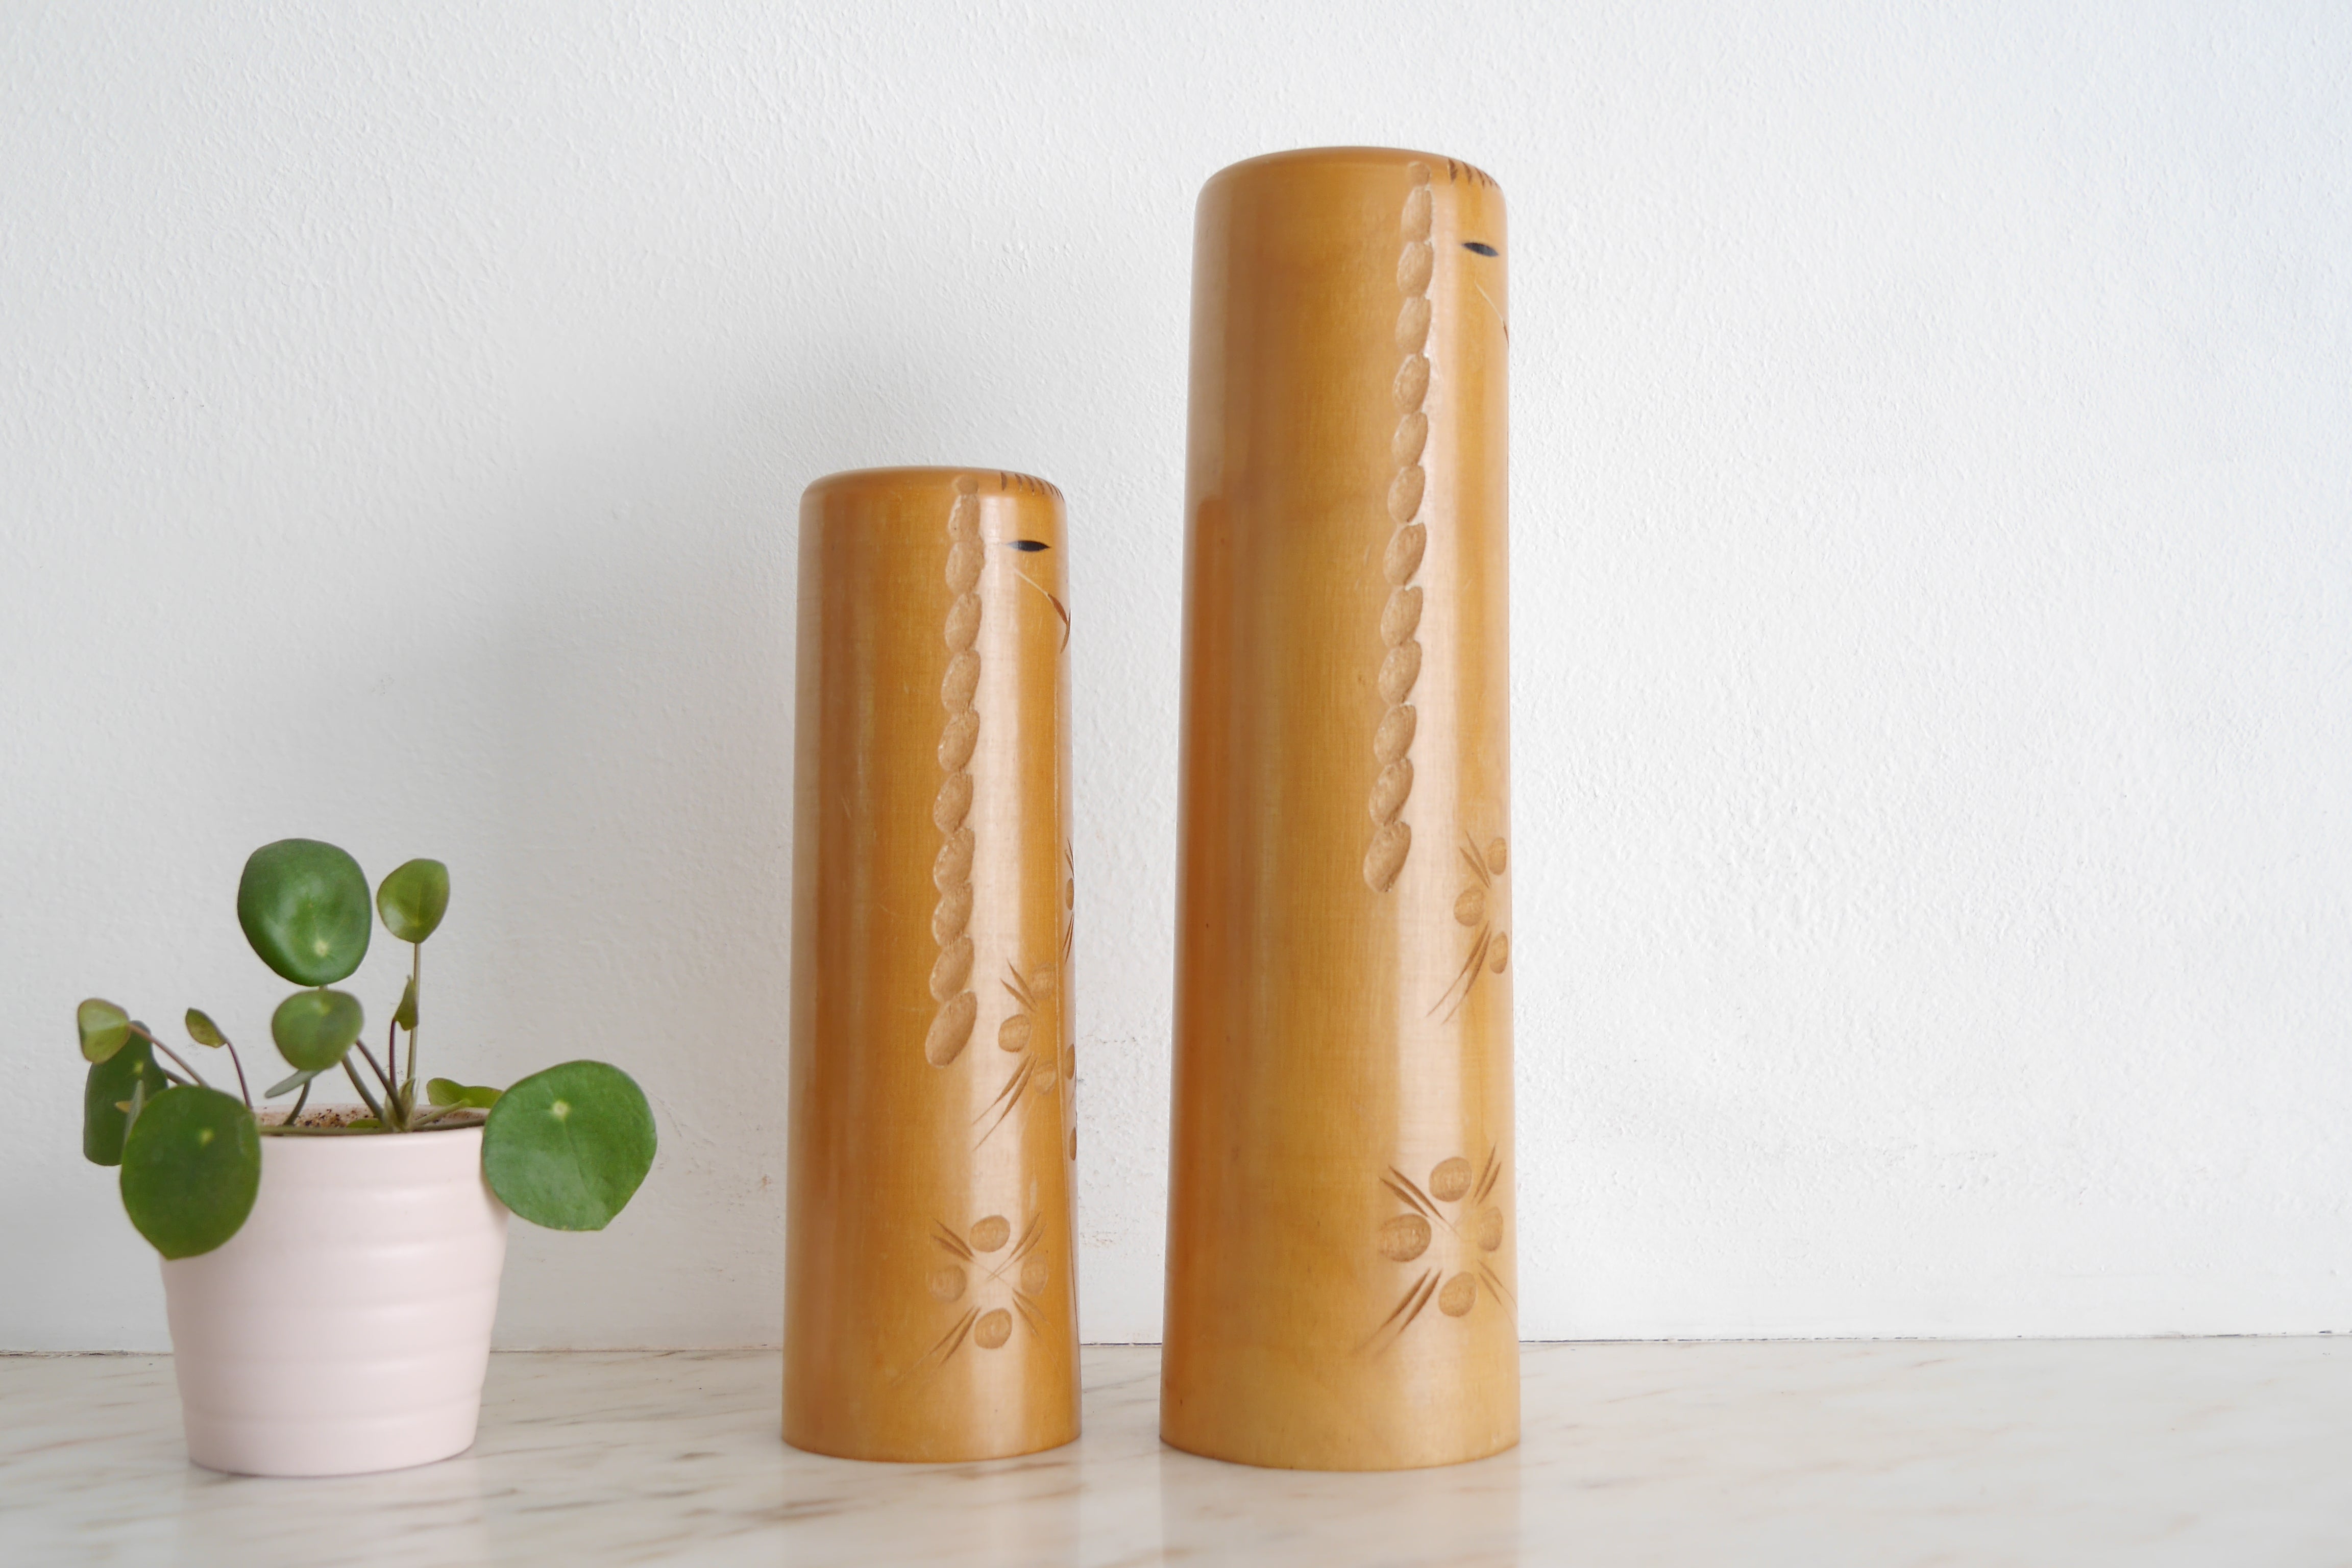 Pair of Vintage Creative Kokeshi by Chiyomatsu Kanou (1935-unknown) | 18 cm and 23,5 cm